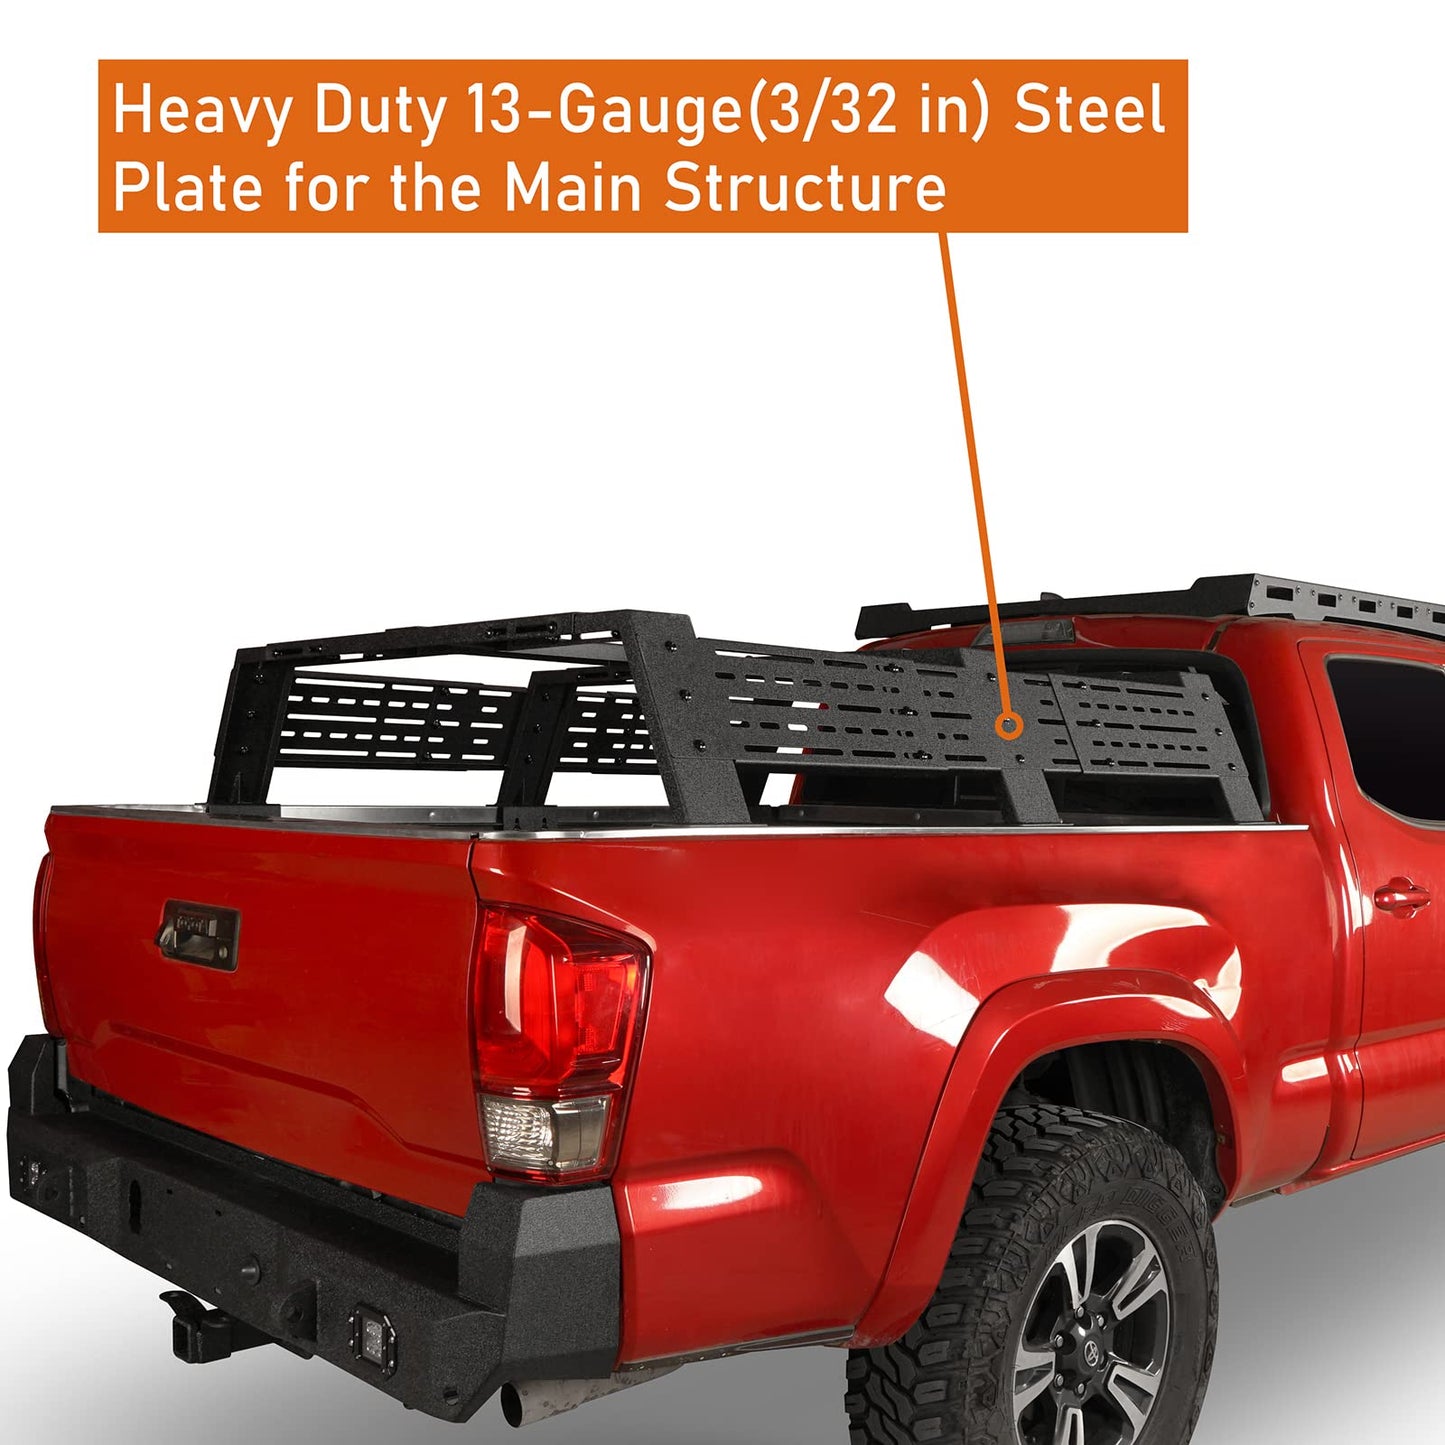 12.2"//18.8" High Overland Bed Rack Full-Size for Toyota 07-23 Tundra & 05-23 Tacoma 6' Bed